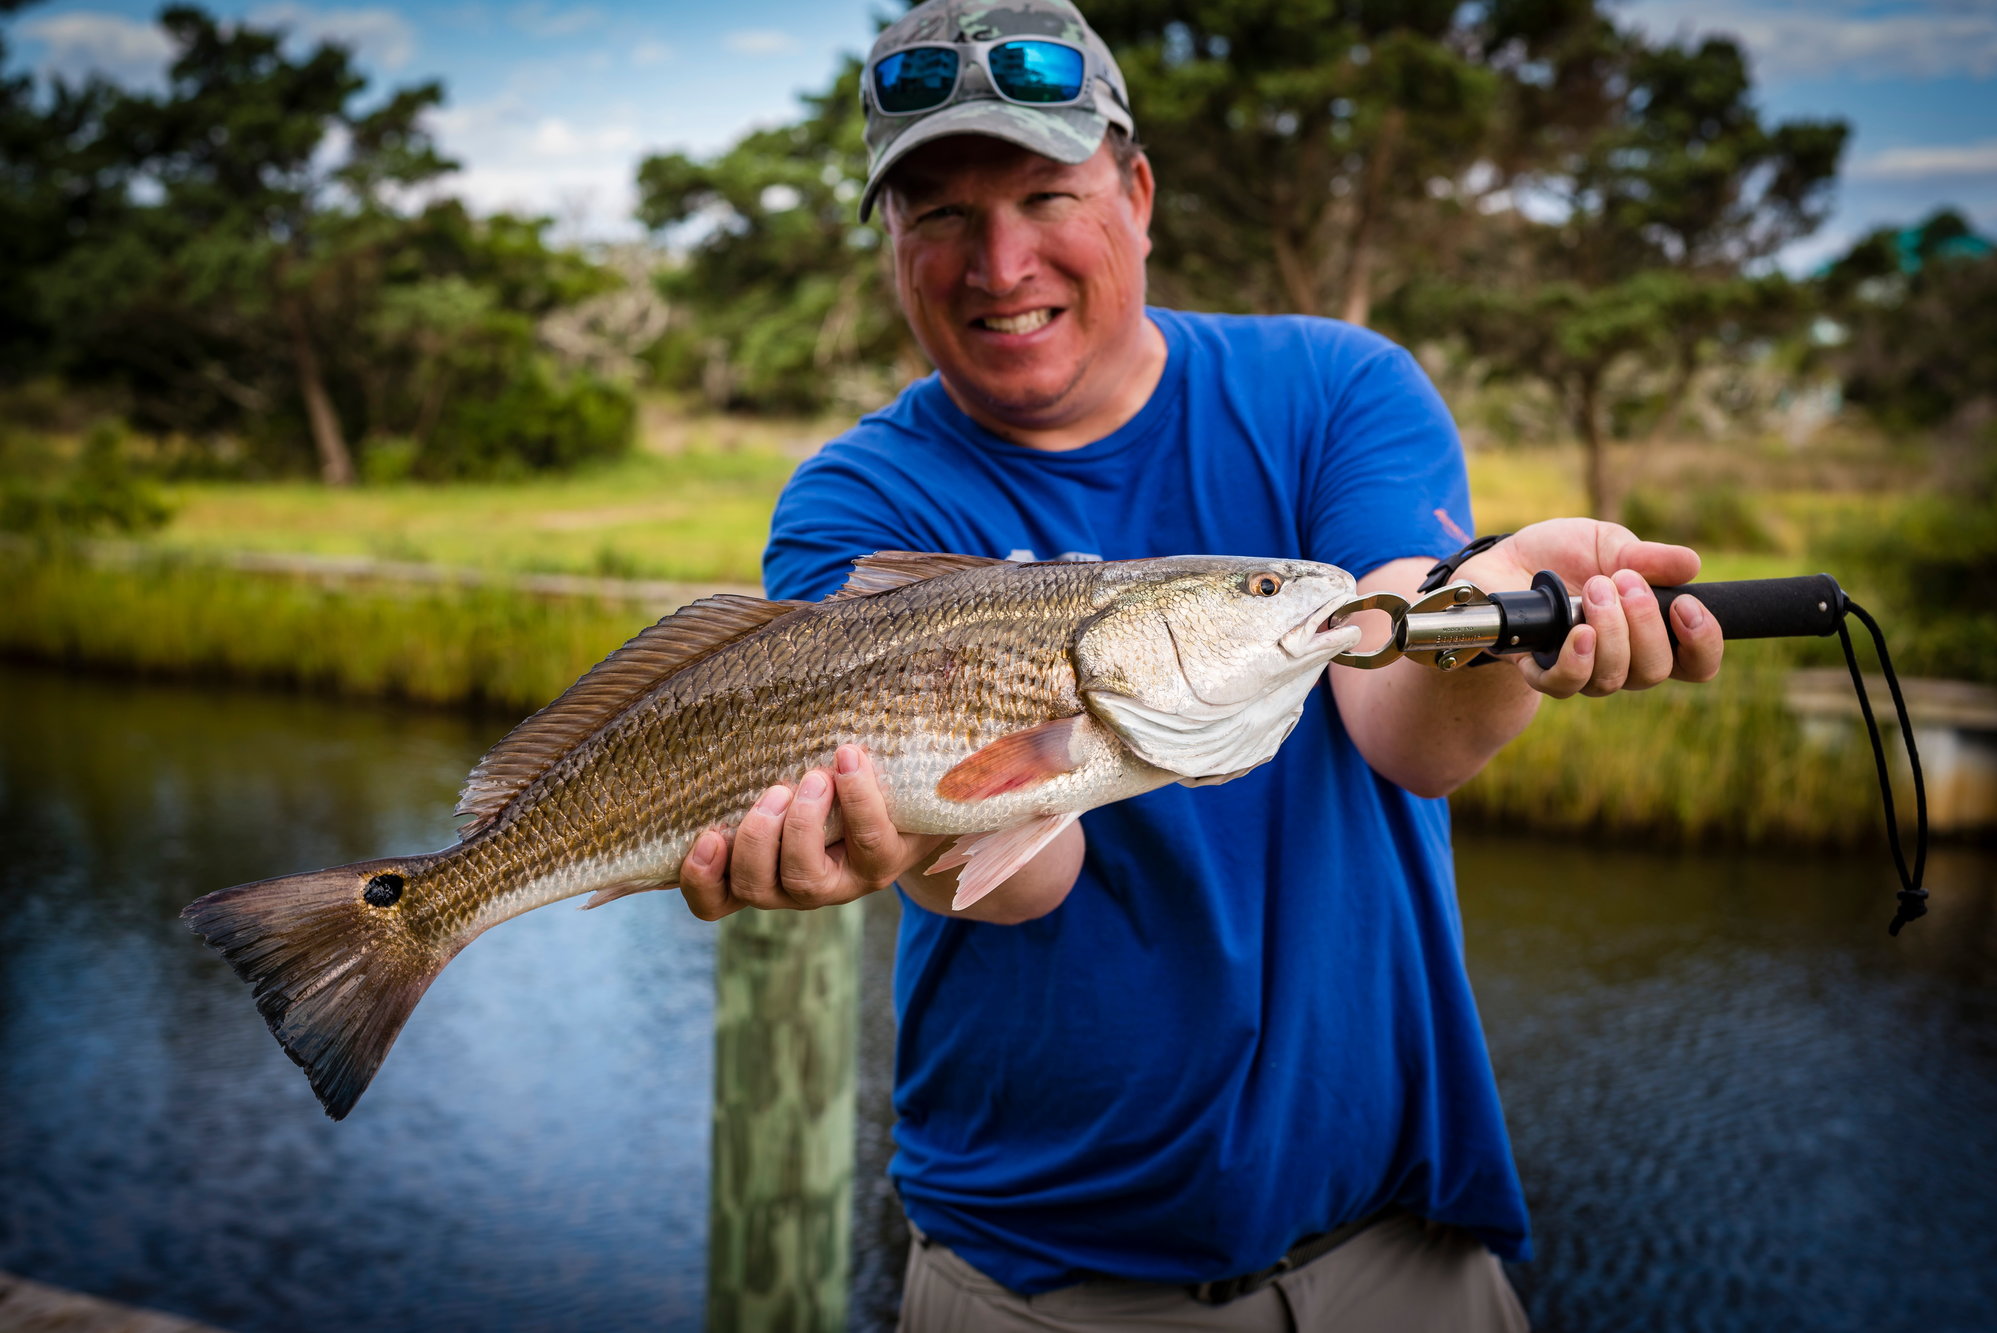 Fishing Line - Redfish & trout - The Hull Truth - Boating and Fishing Forum